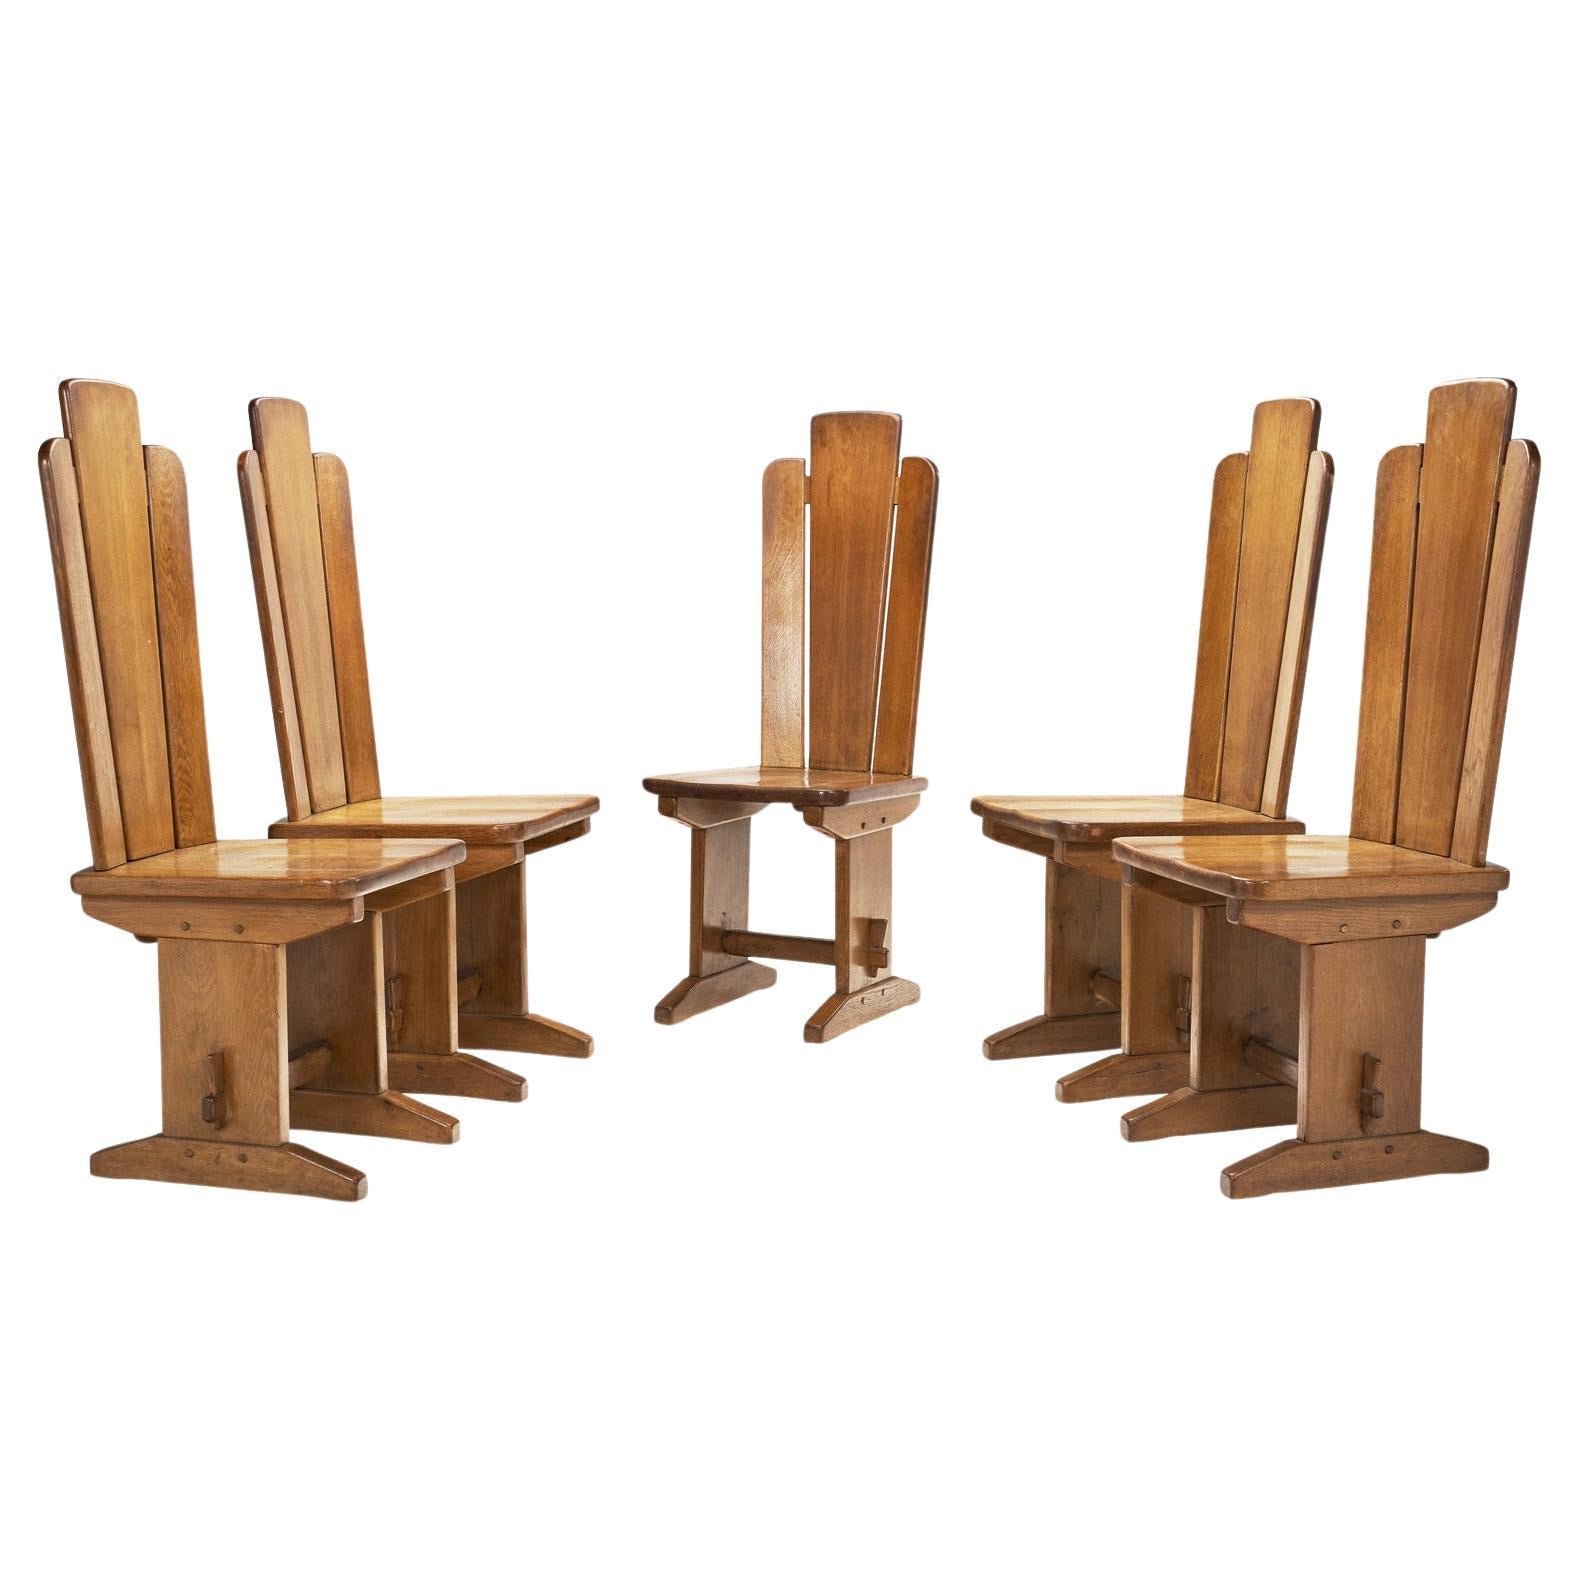 Set of Five Brutalist Solid Oak Dining Chairs, Europe 1970s For Sale